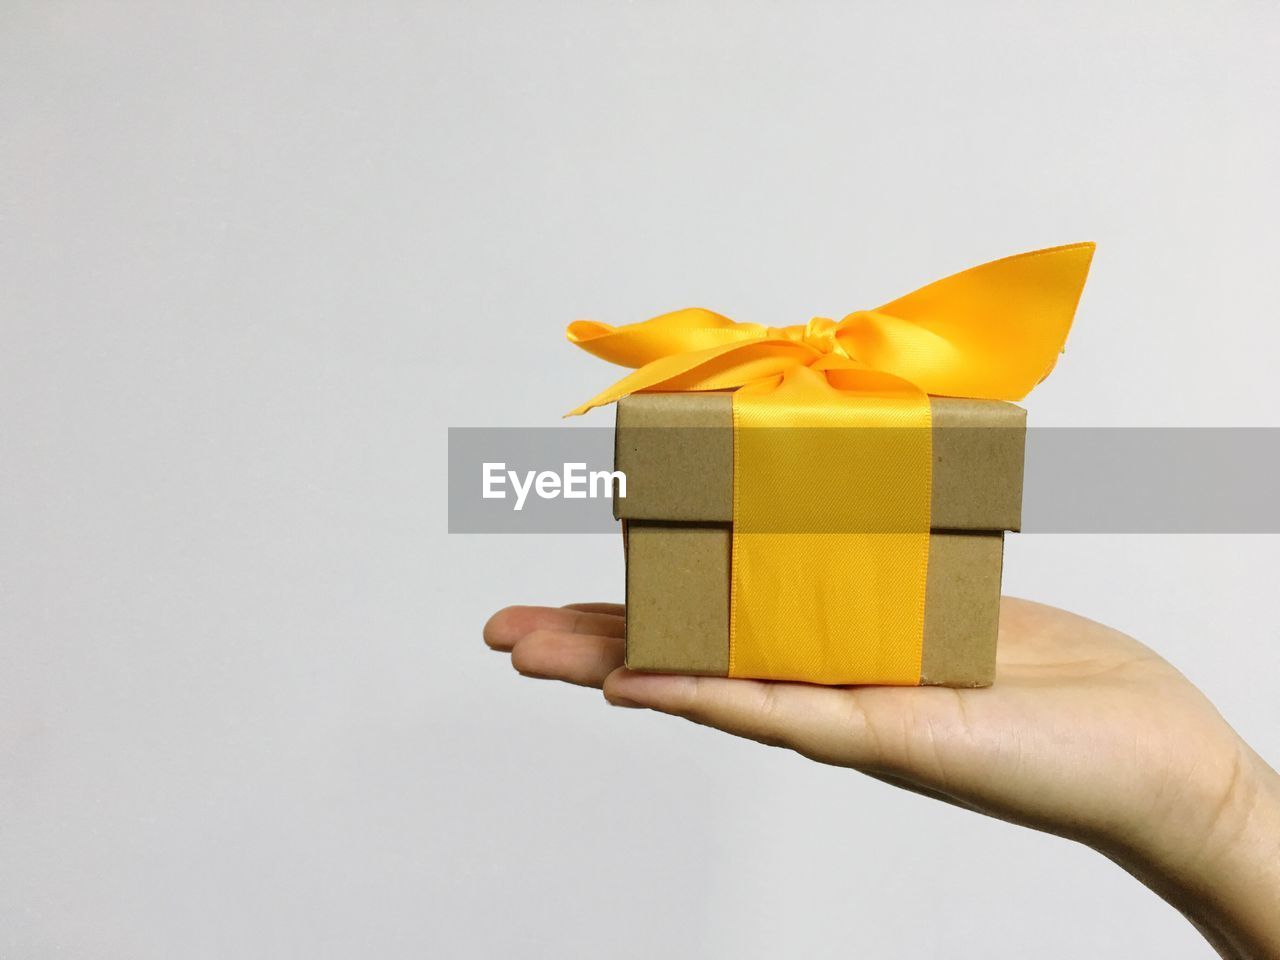 Cropped hand of person holding gift box against white background